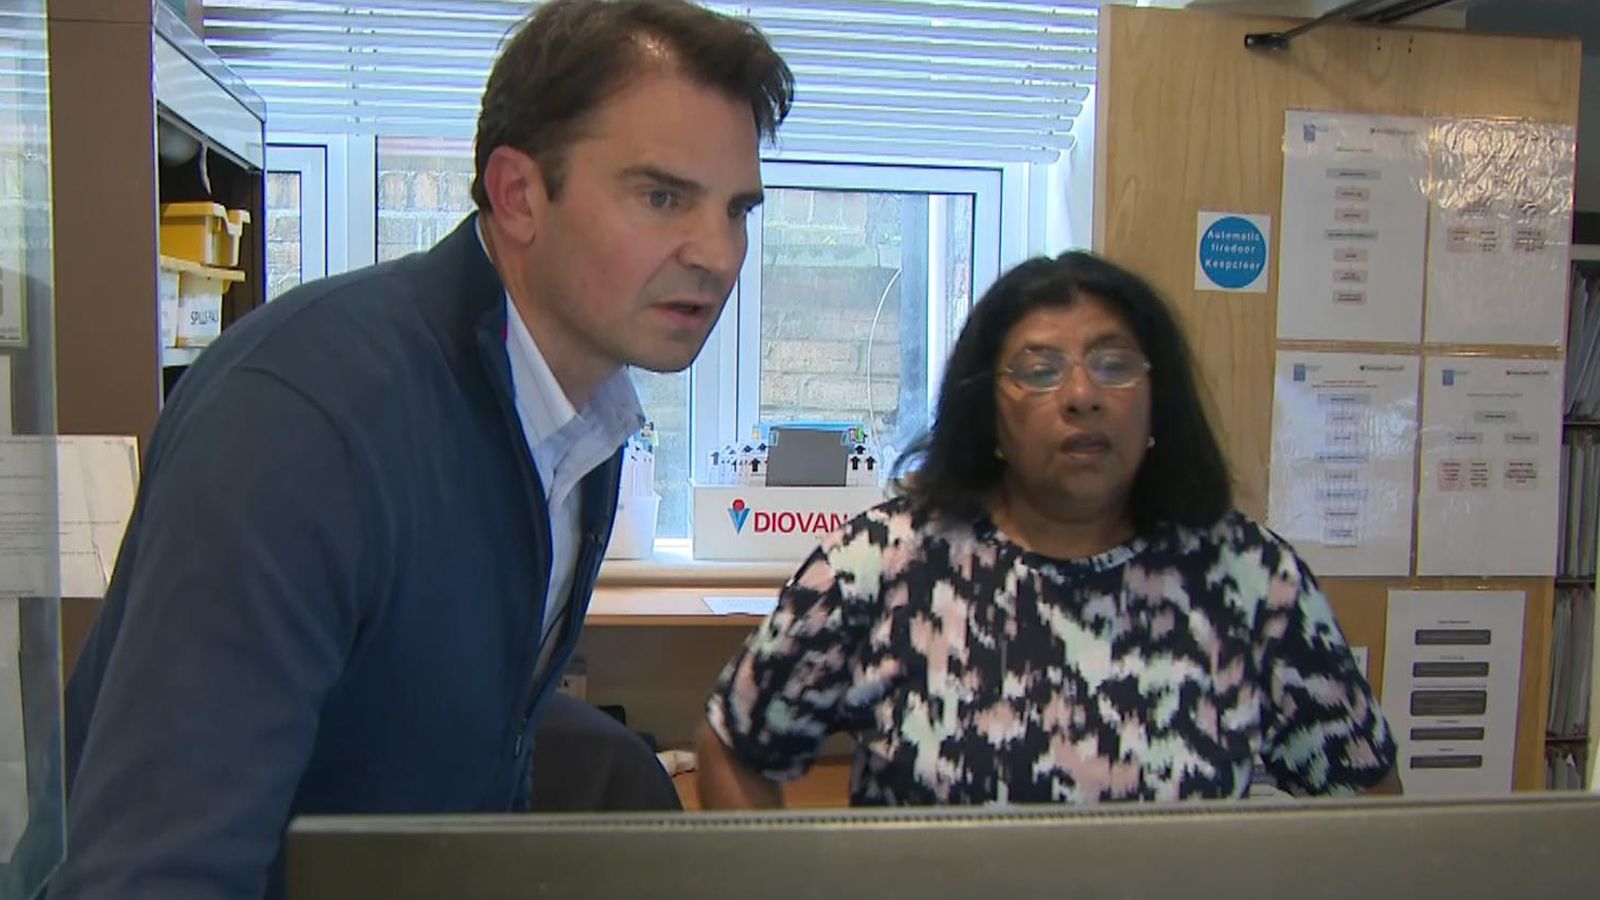 GP fears patients will suffer harm after NHS cyber attack